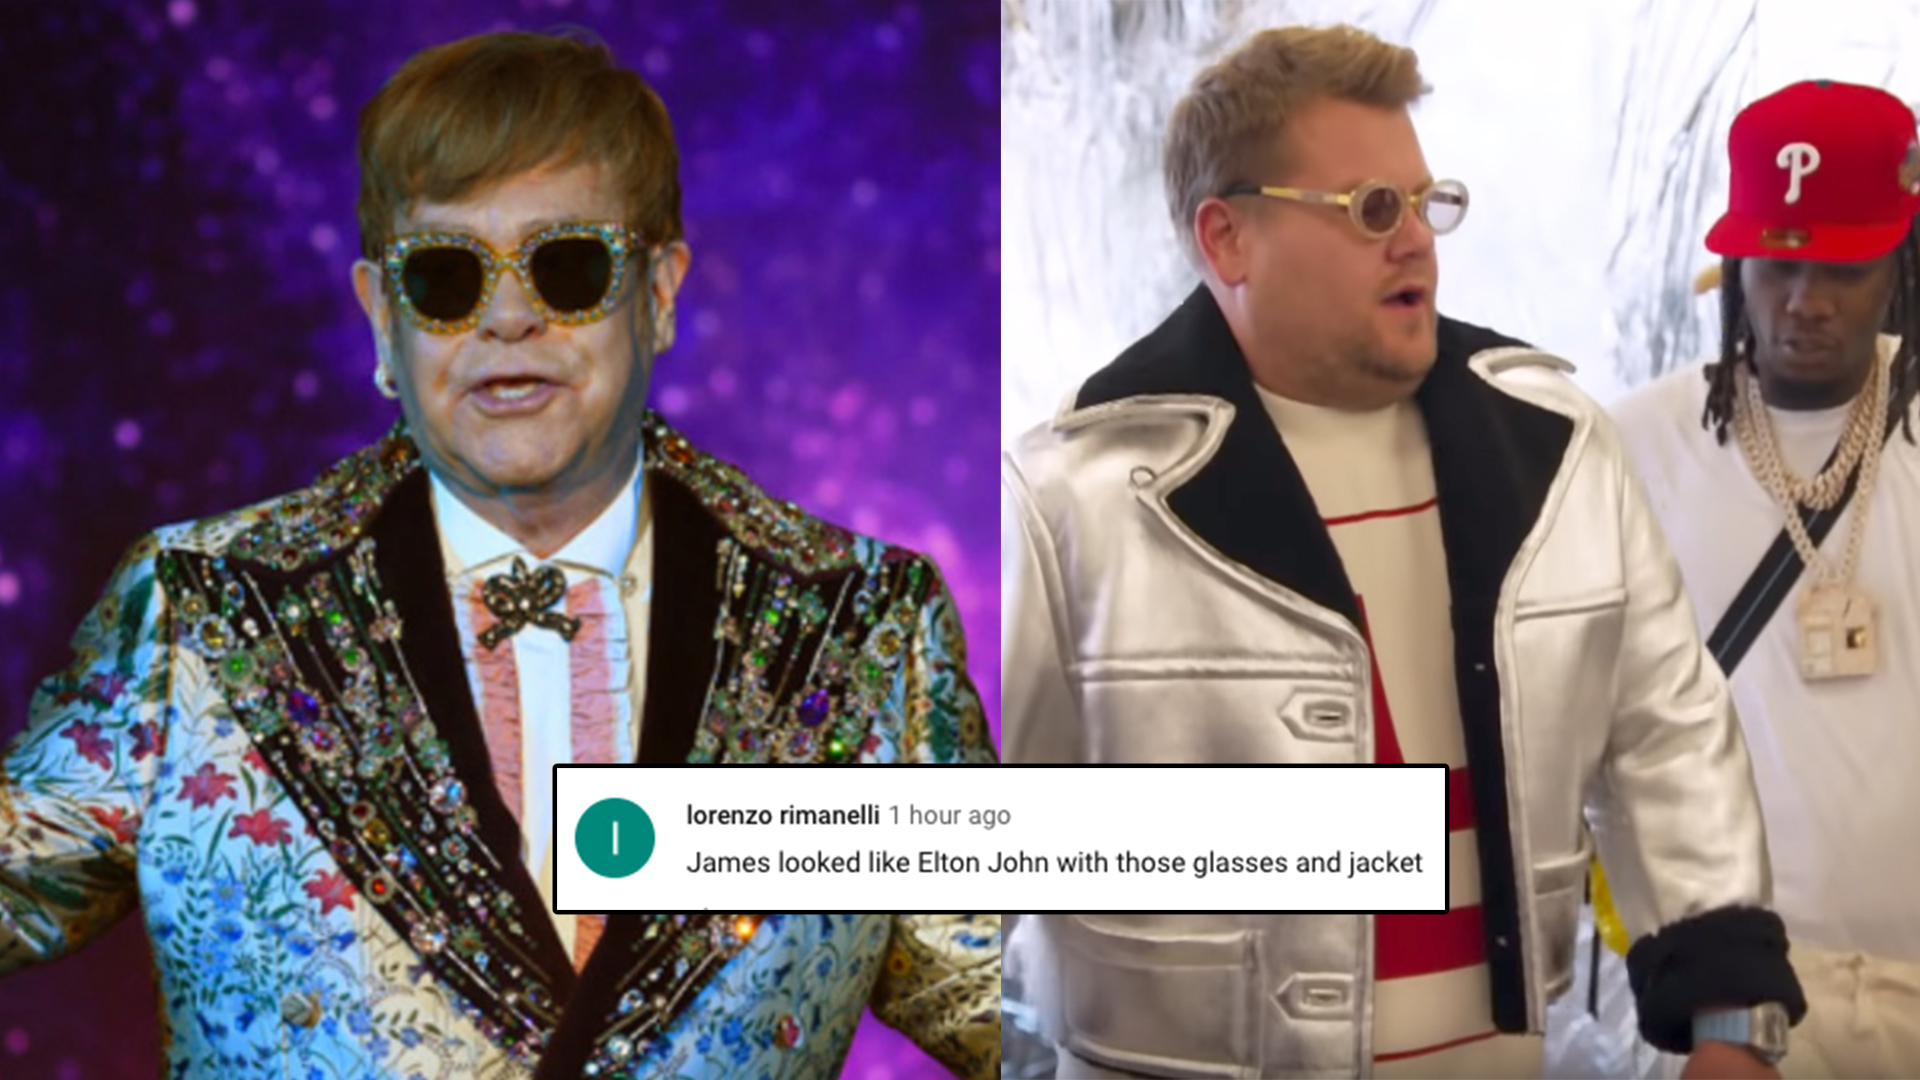 Are we sure Elton and James aren't related?